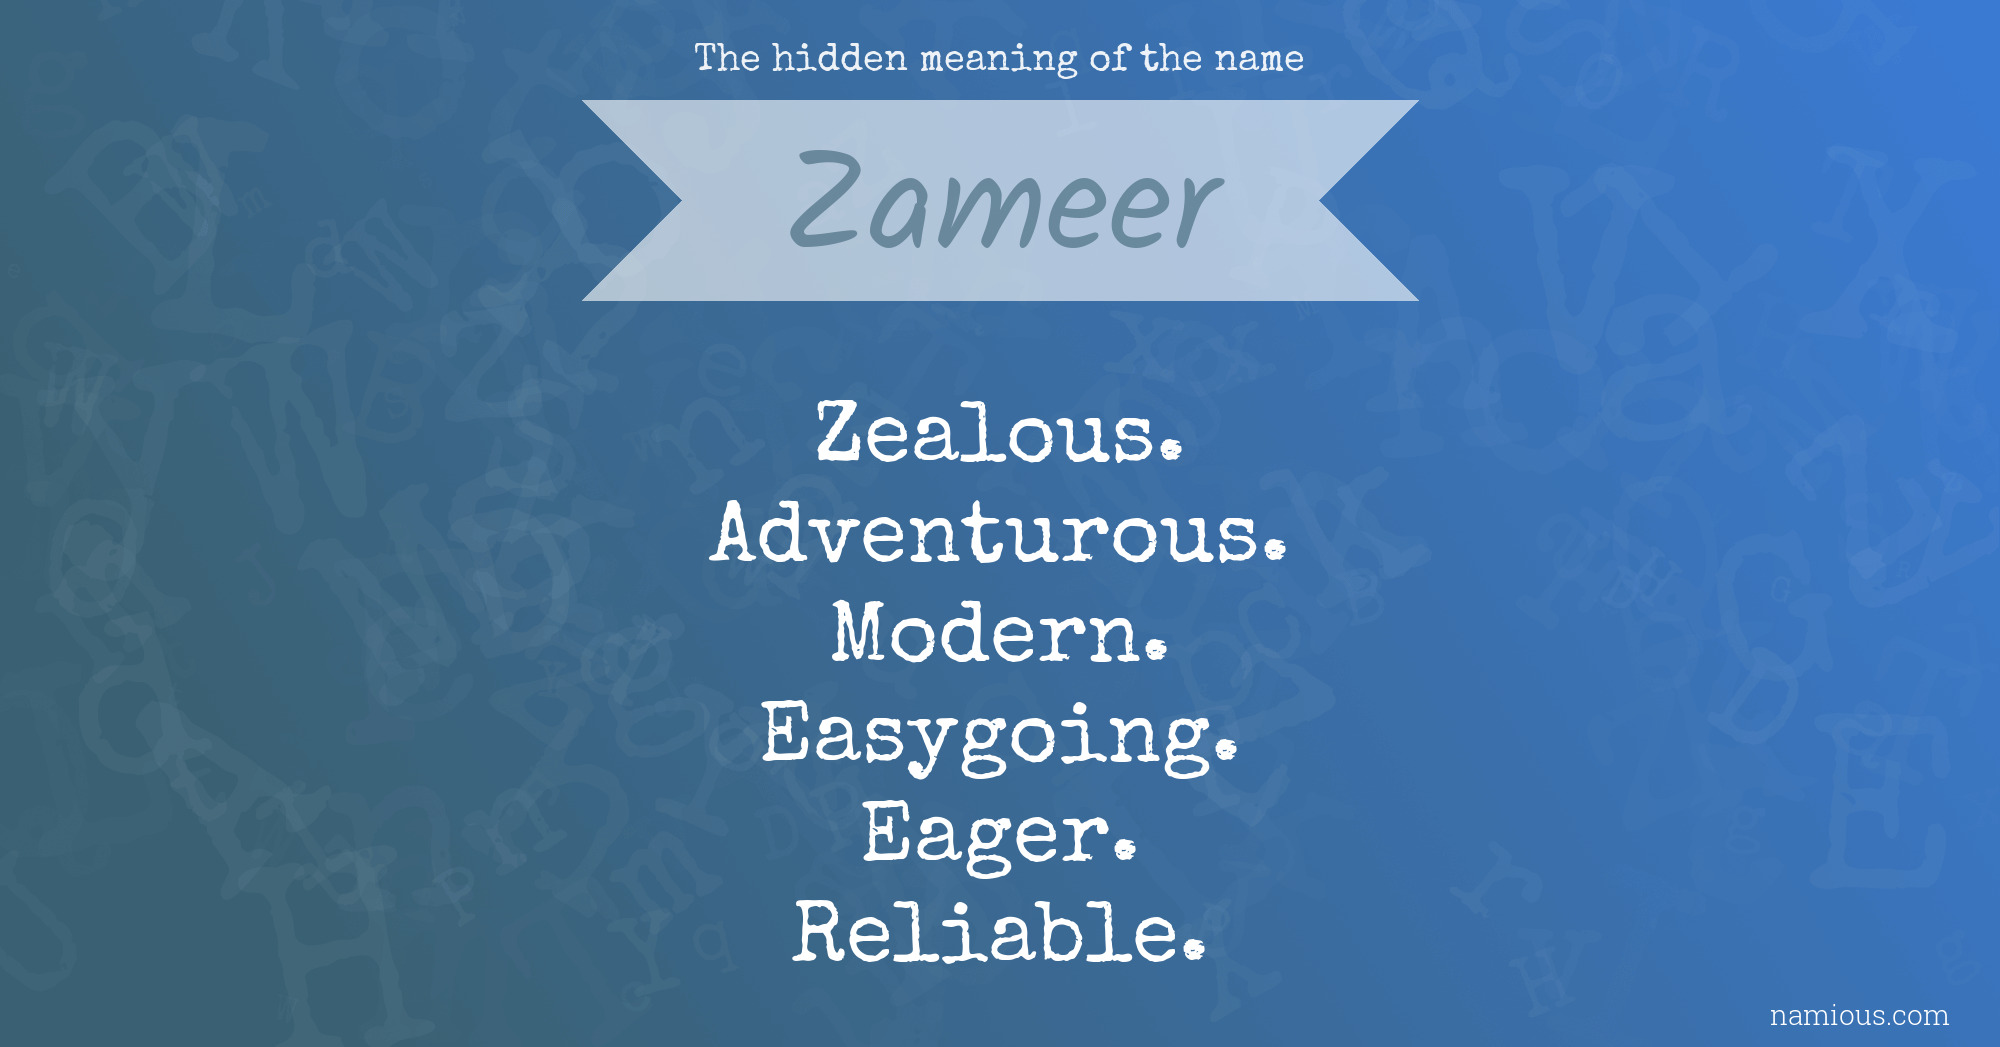 The hidden meaning of the name Zameer